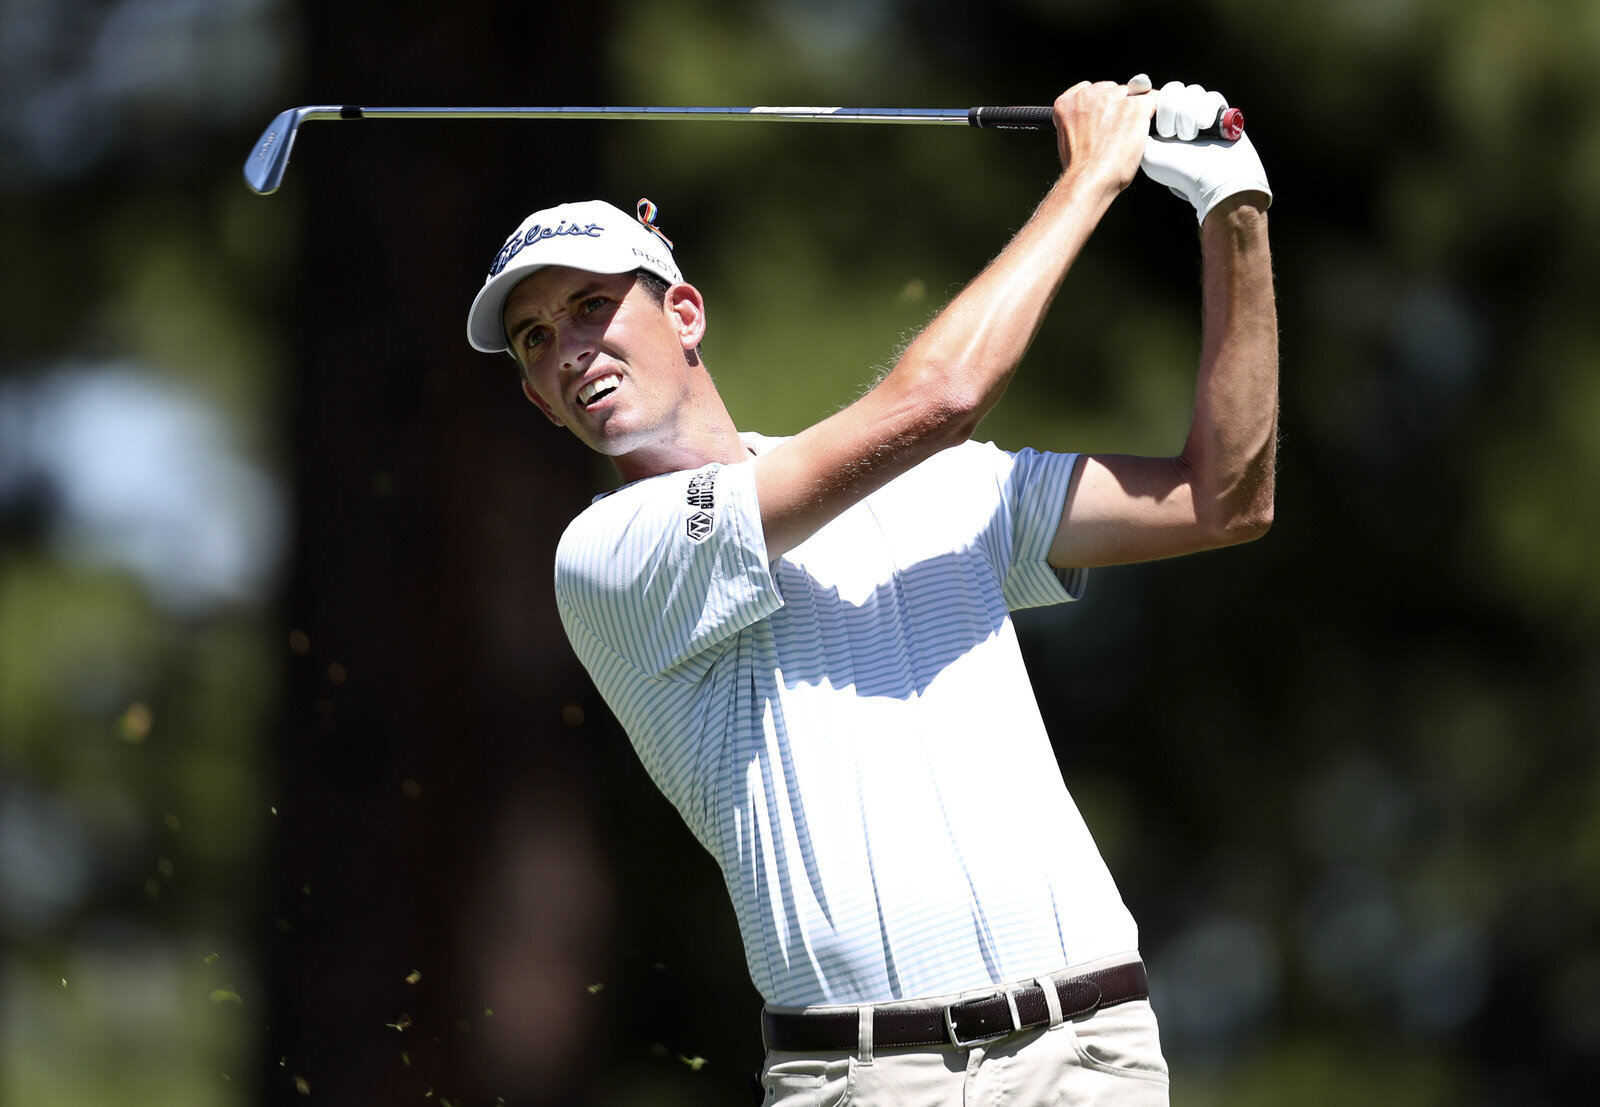  TRUCKEE, CALIFORNIA - AUGUST 01: Chesson Hadley plays his shot from the fourth tee during the third round of the Barracuda Championship at Tahoe Mountain Club's Old Greenwood Golf Course on August 01, 2020 in Truckee, California. (Photo by Jed Jacob